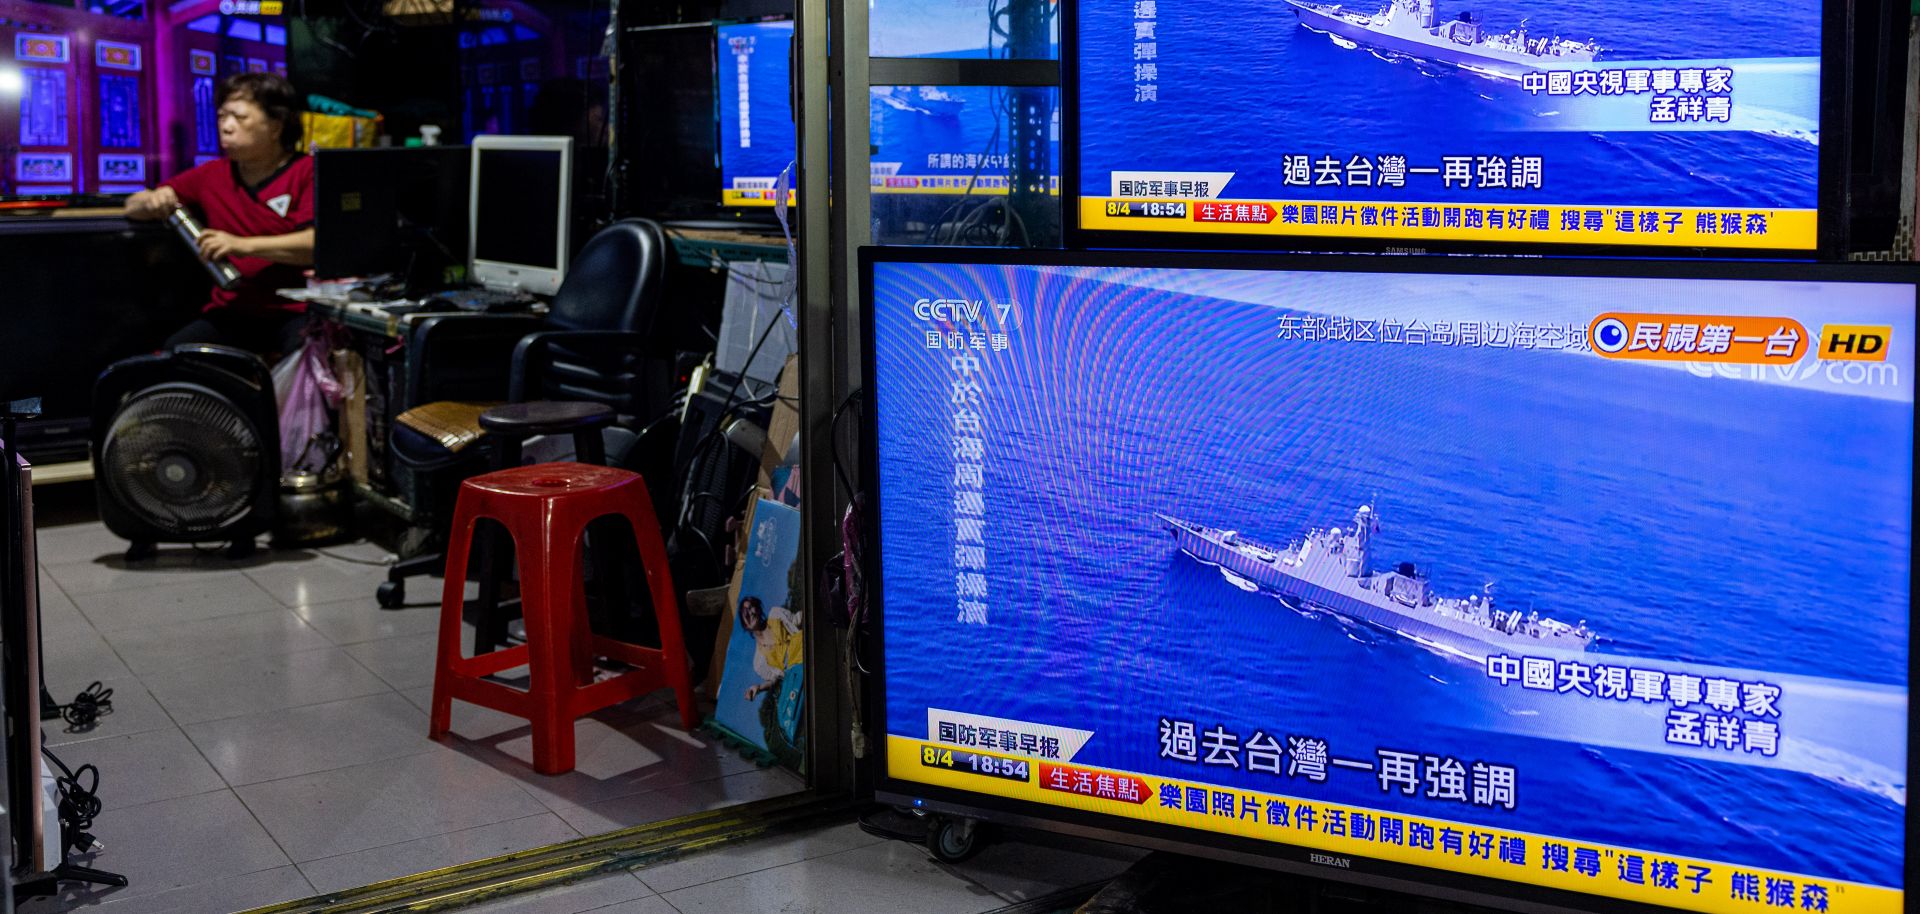 A television at an electrical repair store in Taipei shows a news broadcast about China conducting military drills near Taiwan on Aug. 4, 2022.